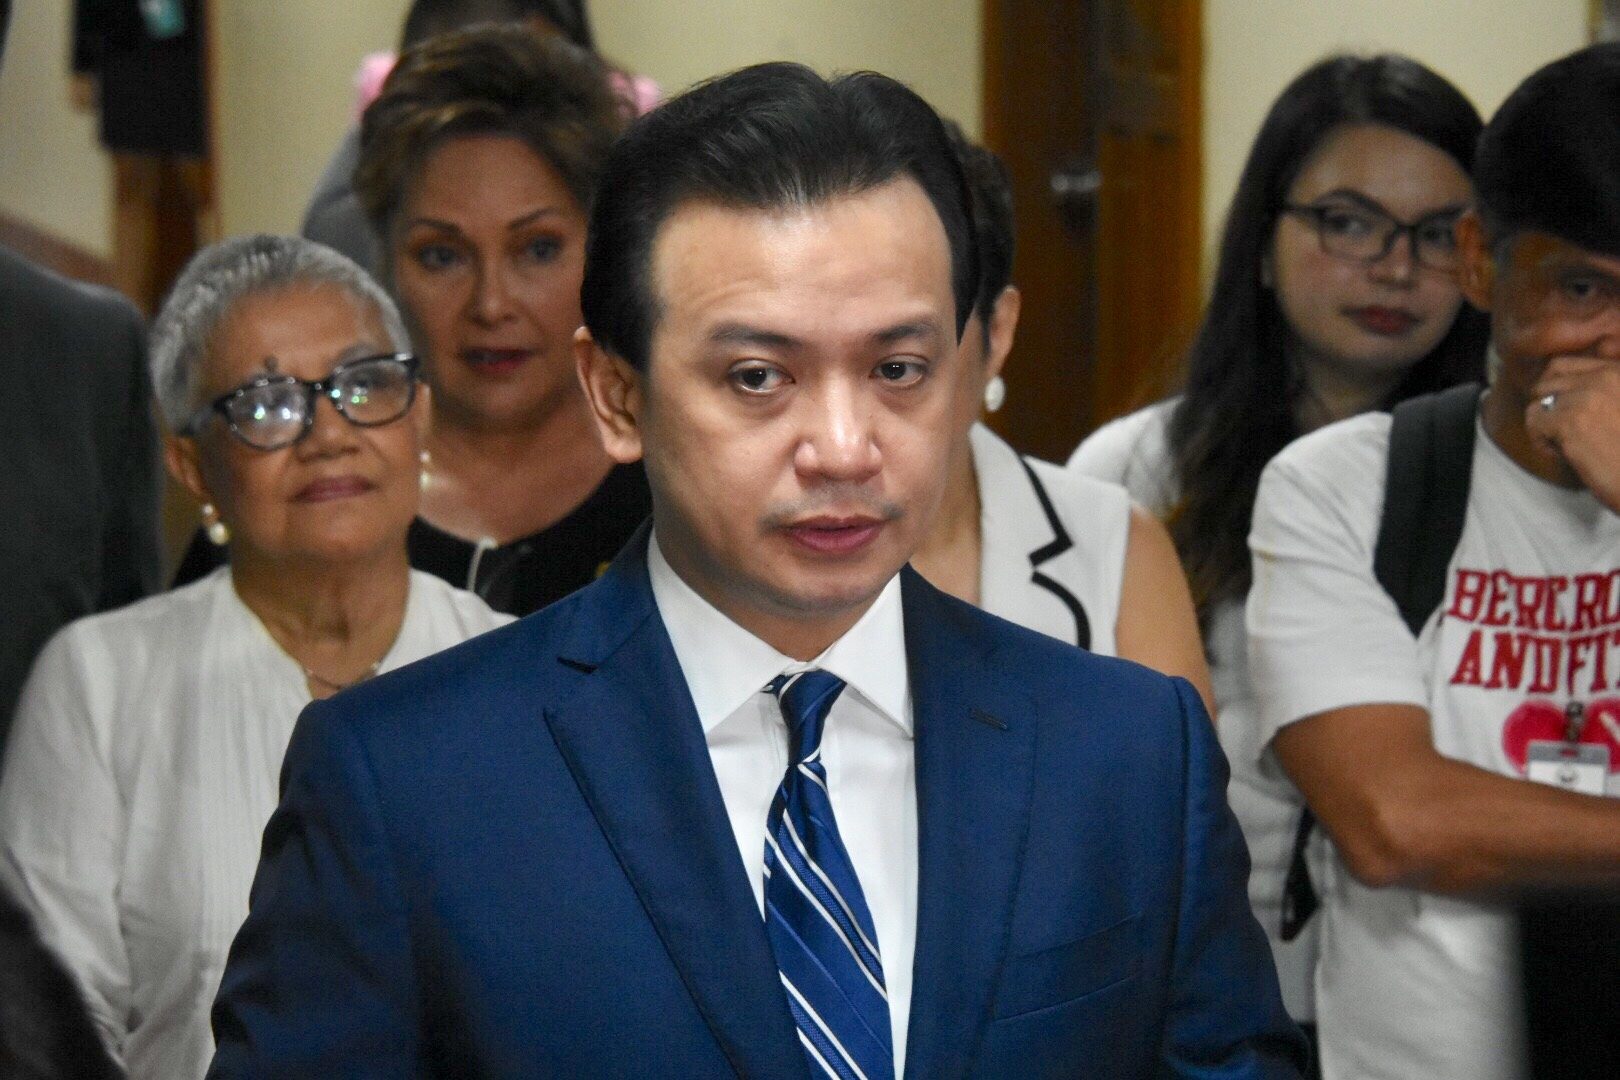 Trillanes: Libel complaint filed by Paolo Duterte ‘clearly harassment’